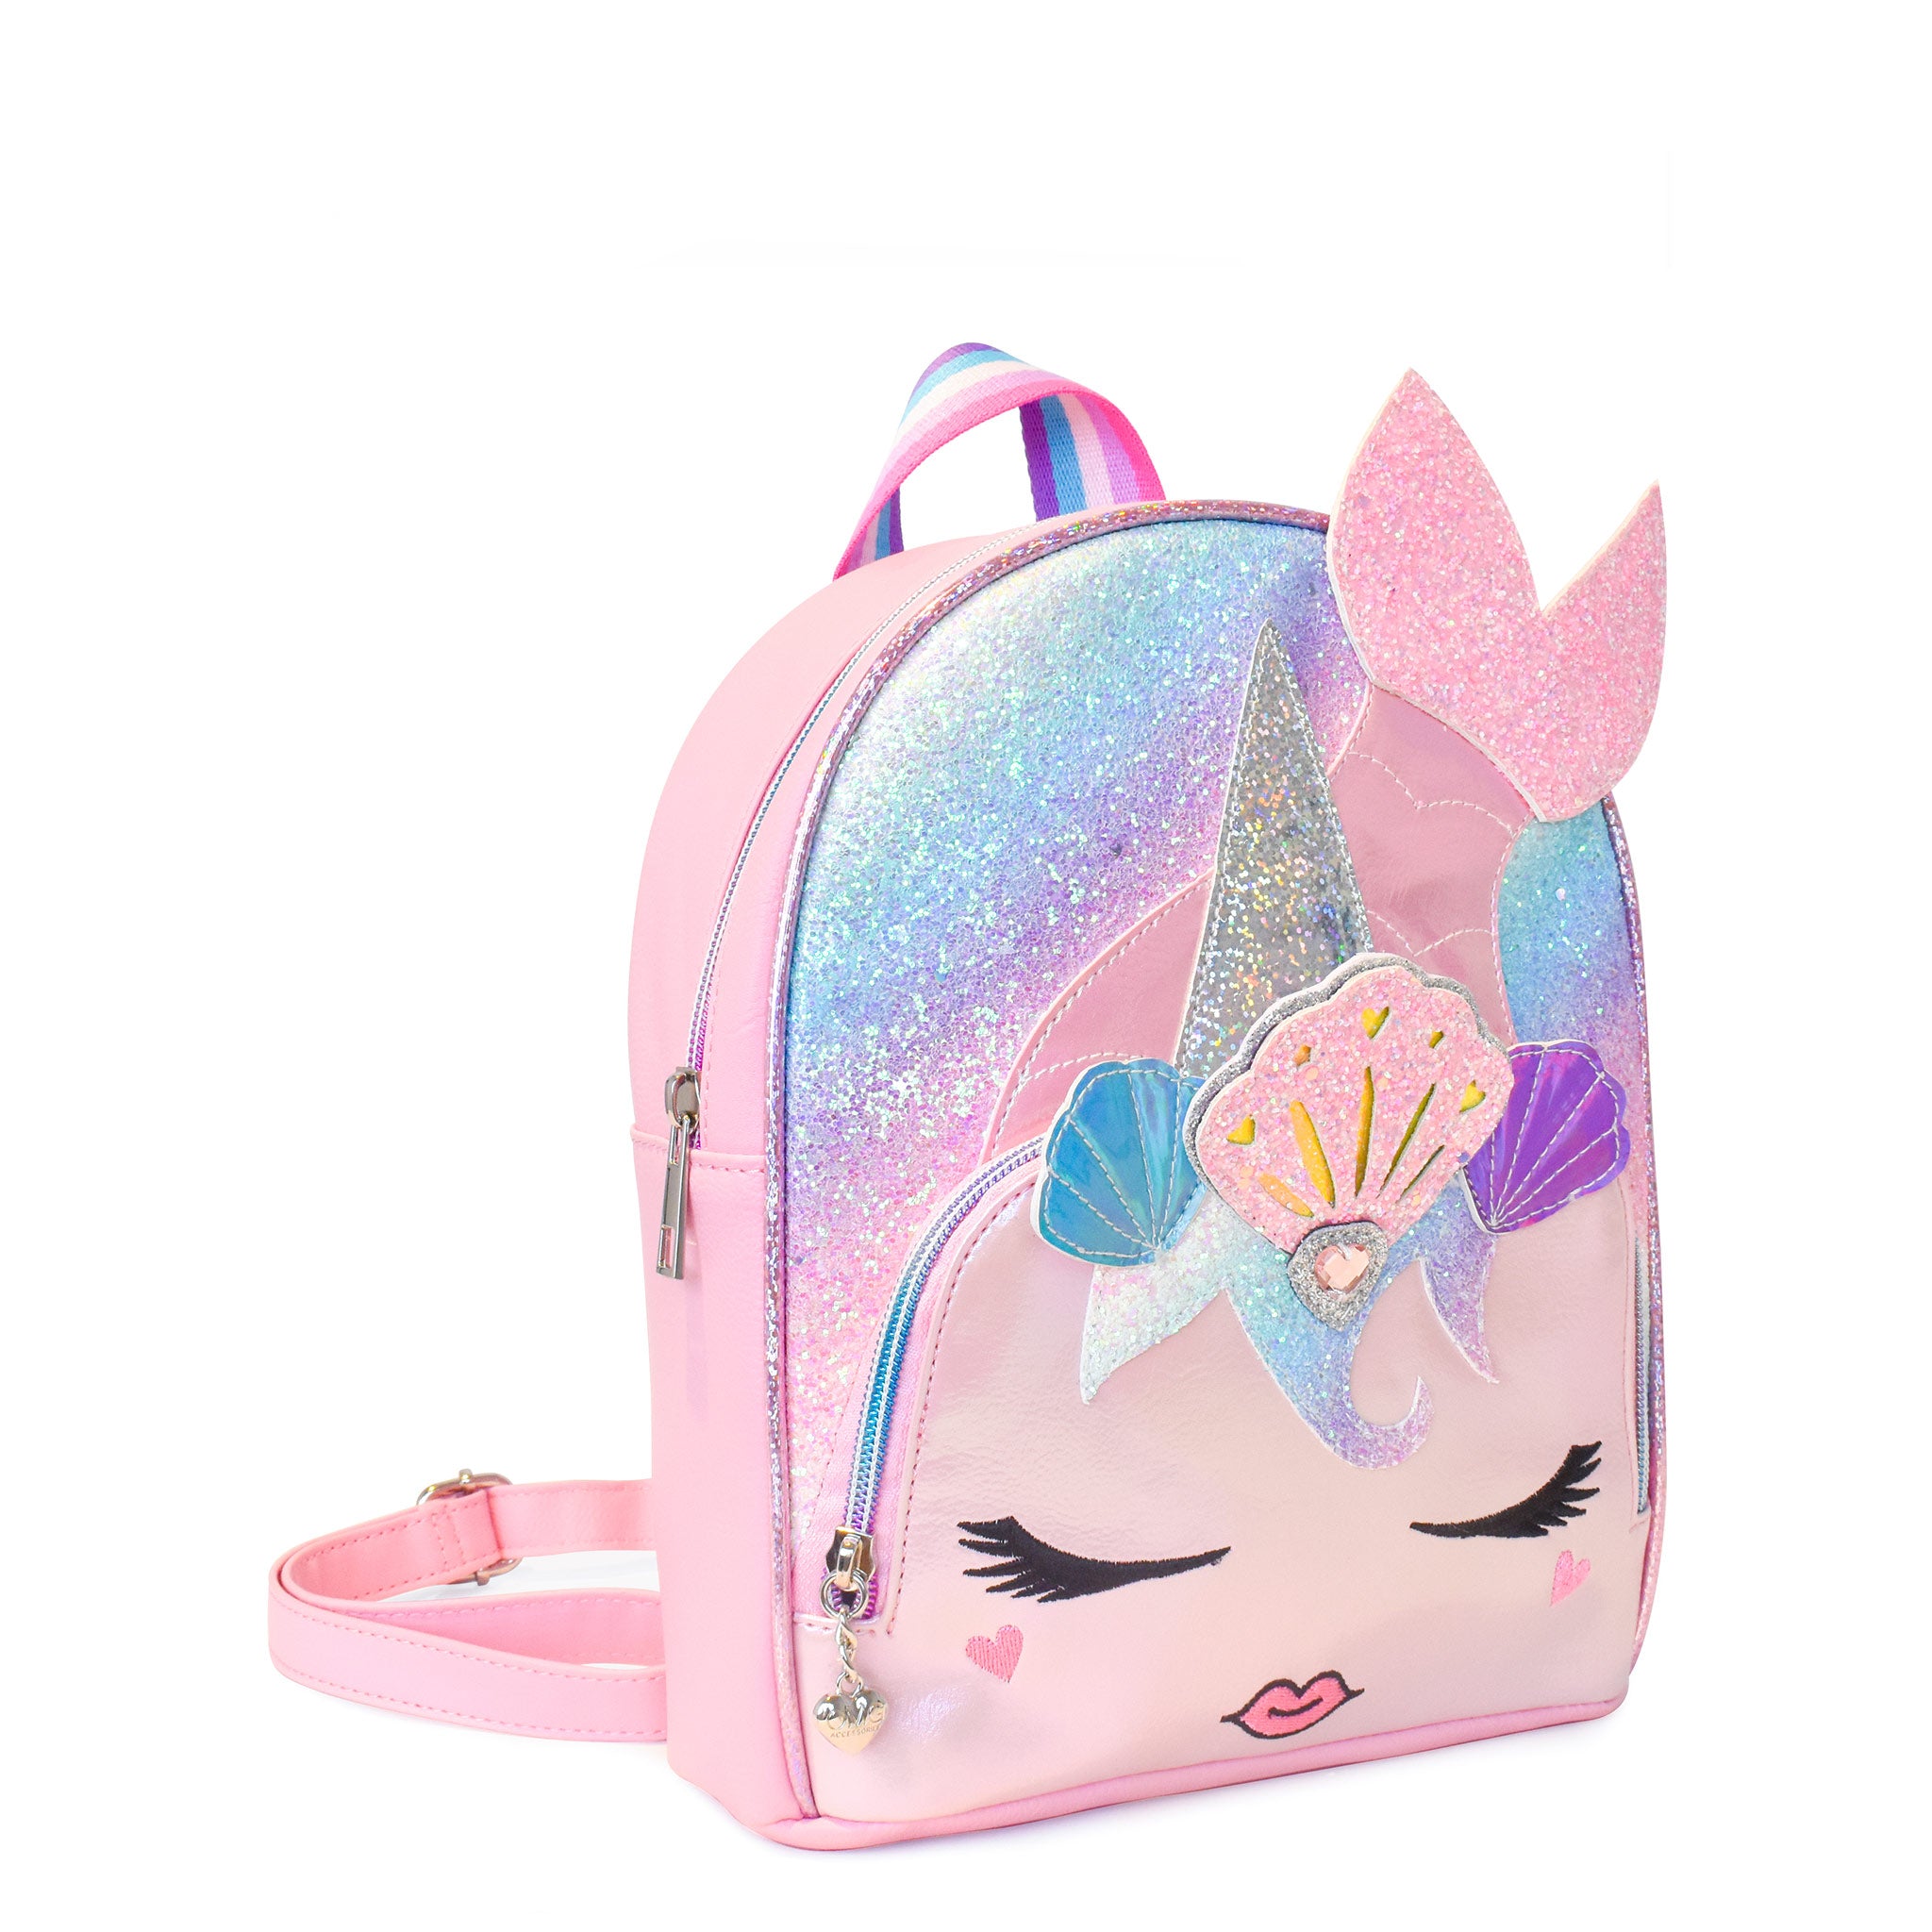 Side view of a unicorn mermaid mini backpack in an ombre glitter , embellished with a seashell crown